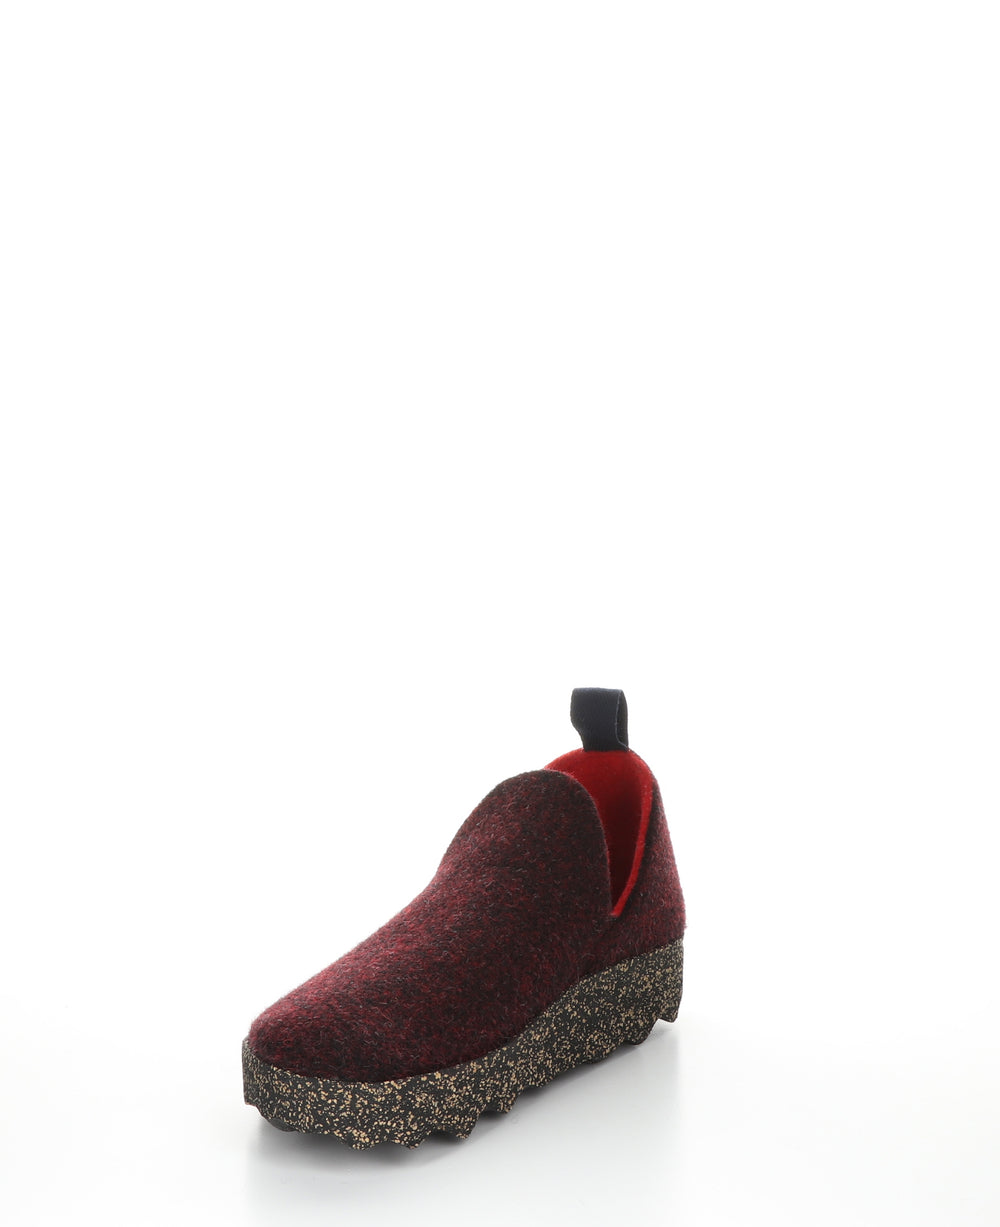 CITY Merlot Round Toe Shoes|CITY Chaussures à Bout Rond in Rouge